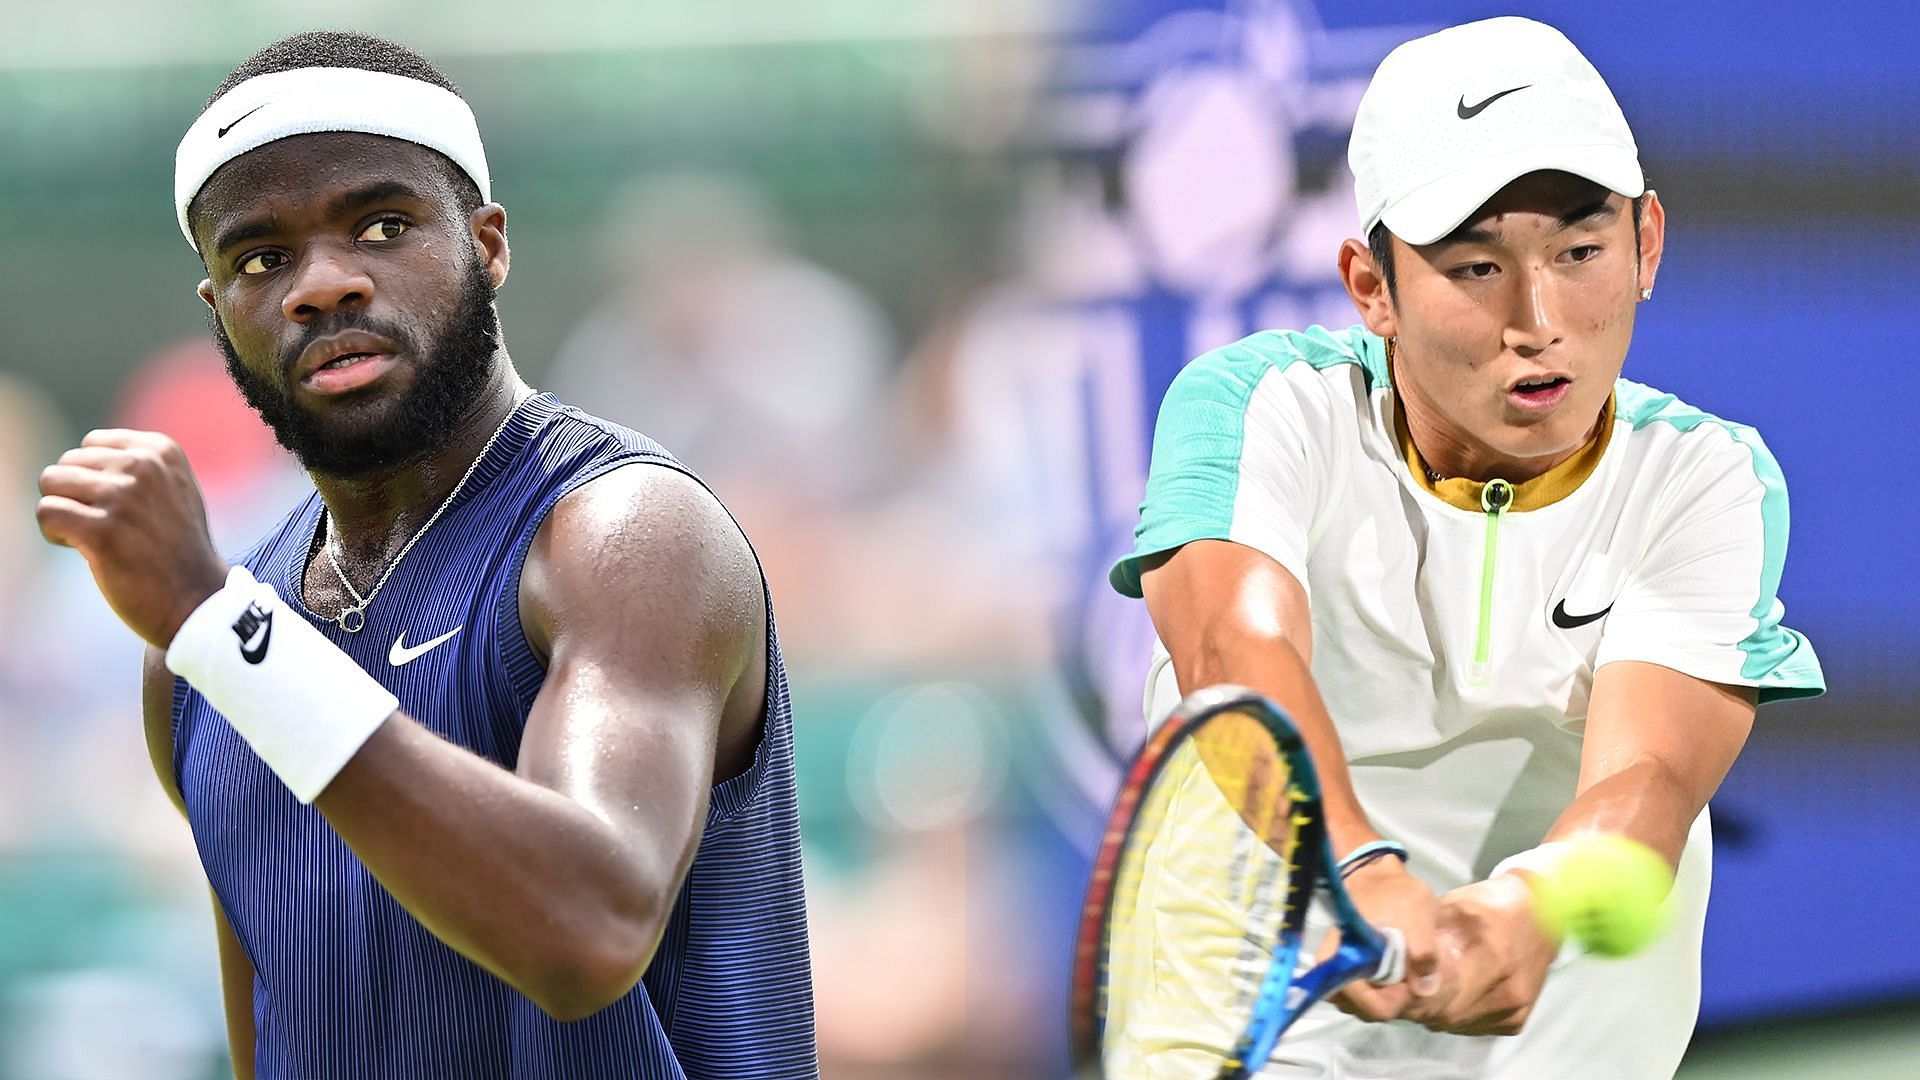 Frances Tiafoe vs Juncheng Shang is one of the third-round matches at the 2023 Citi Open.